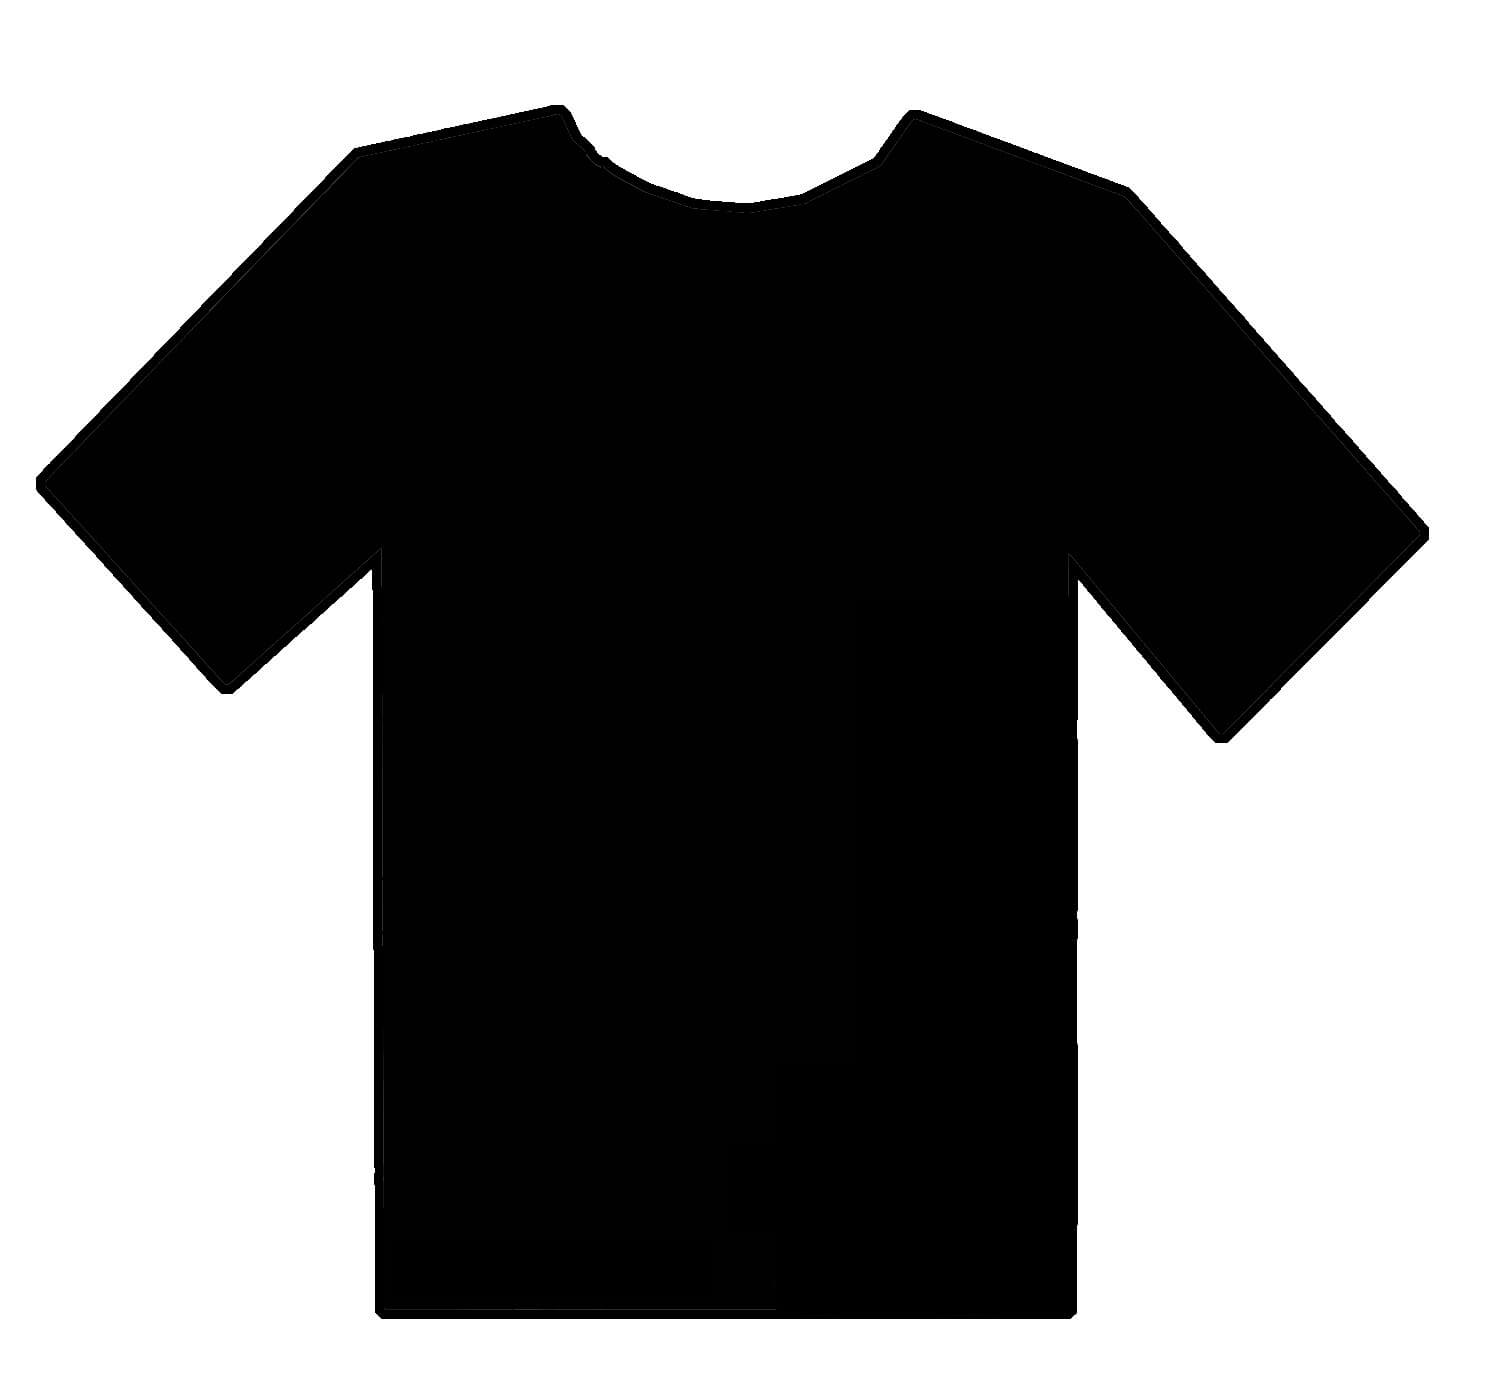 Blank T Shirts Template. Bessed Comprintable Tee Template At With Blank ...